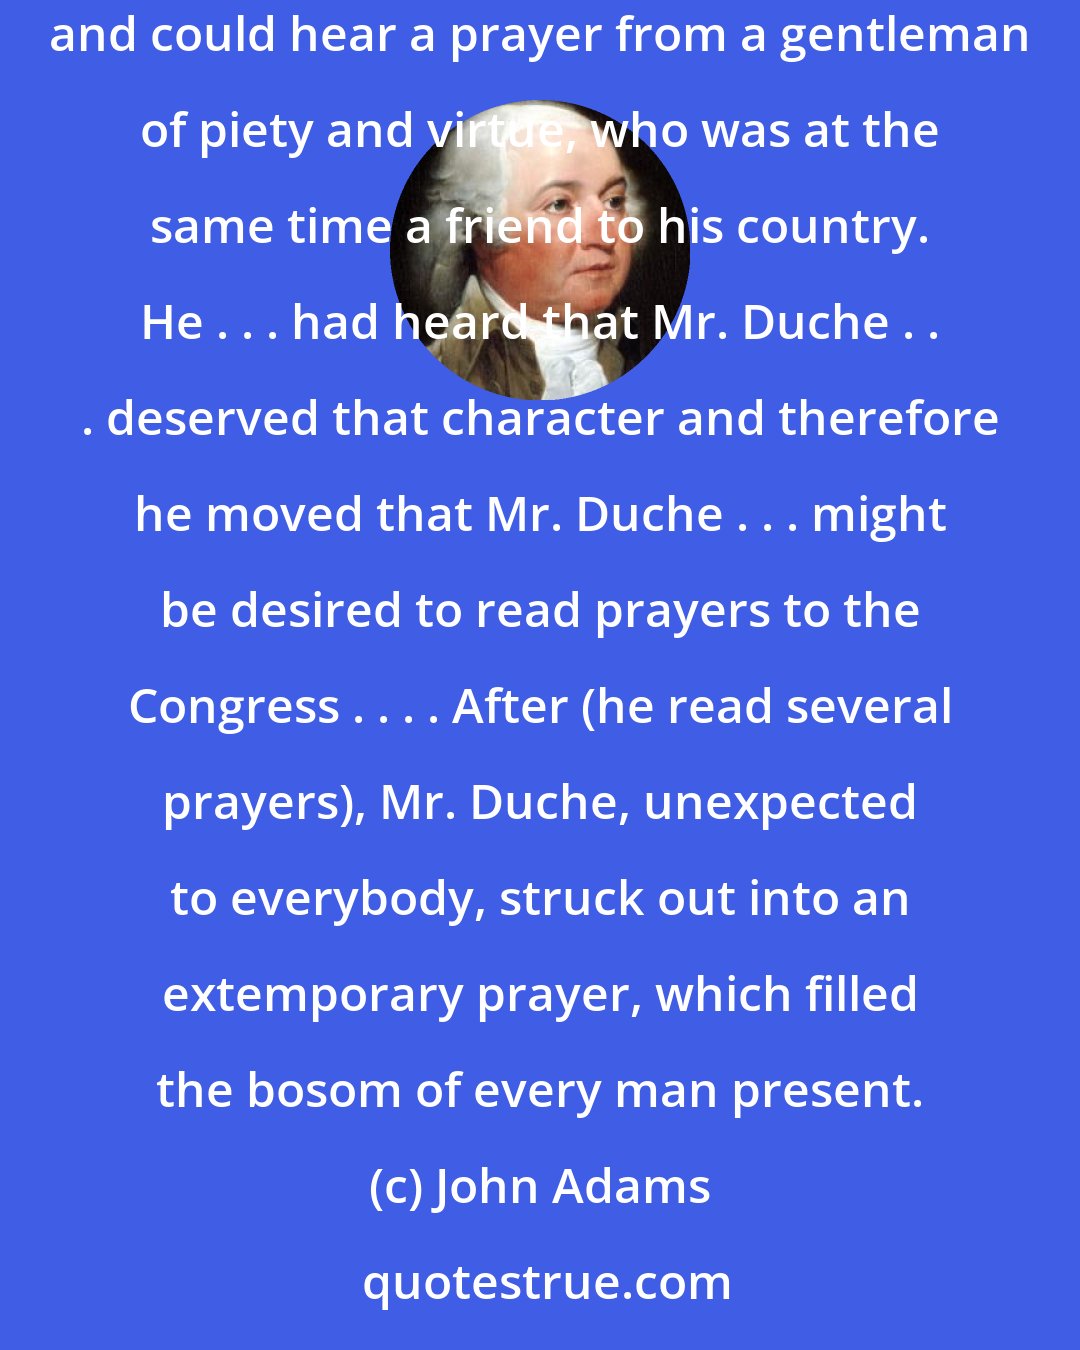 John Adams: When the Congress first met, Mr. Cushing made a motion that it should be opened with prayer . . . Mr. Samuel Adams arose and said he was no bigot, and could hear a prayer from a gentleman of piety and virtue, who was at the same time a friend to his country. He . . . had heard that Mr. Duche . . . deserved that character and therefore he moved that Mr. Duche . . . might be desired to read prayers to the Congress . . . . After (he read several prayers), Mr. Duche, unexpected to everybody, struck out into an extemporary prayer, which filled the bosom of every man present.